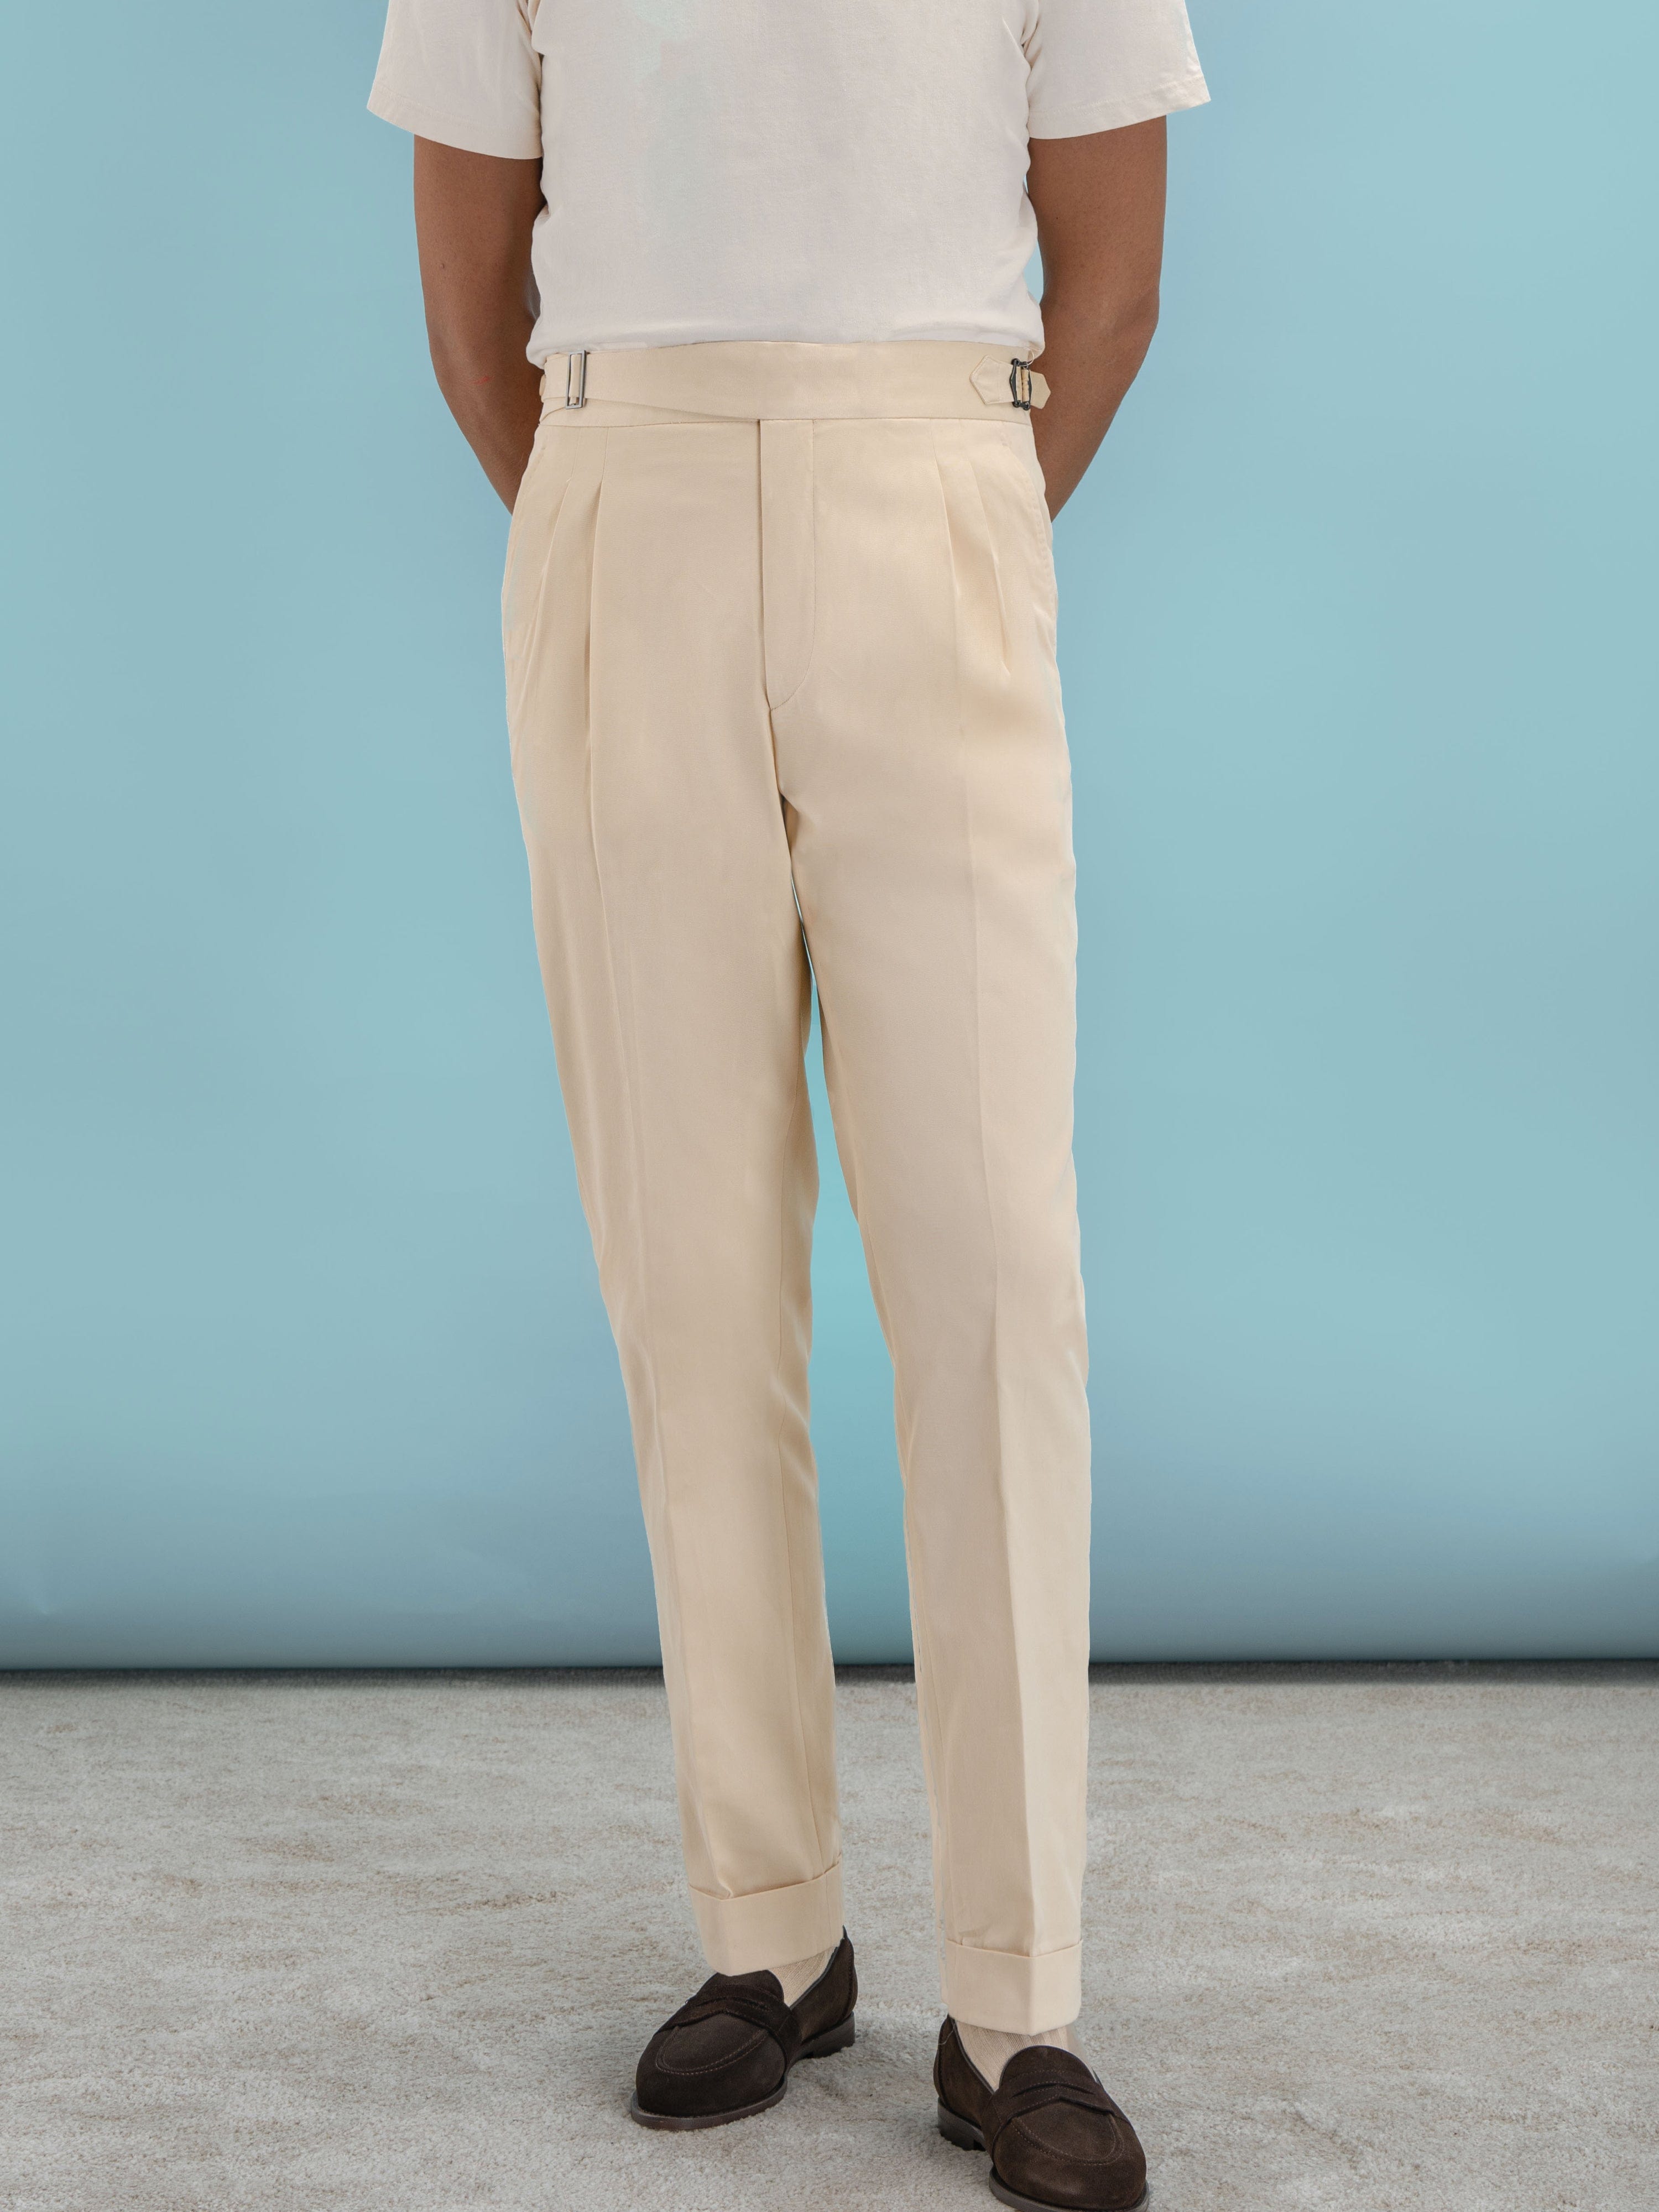 Ivory Dress Pants Custom Made Mens Trousers  Starting At 45